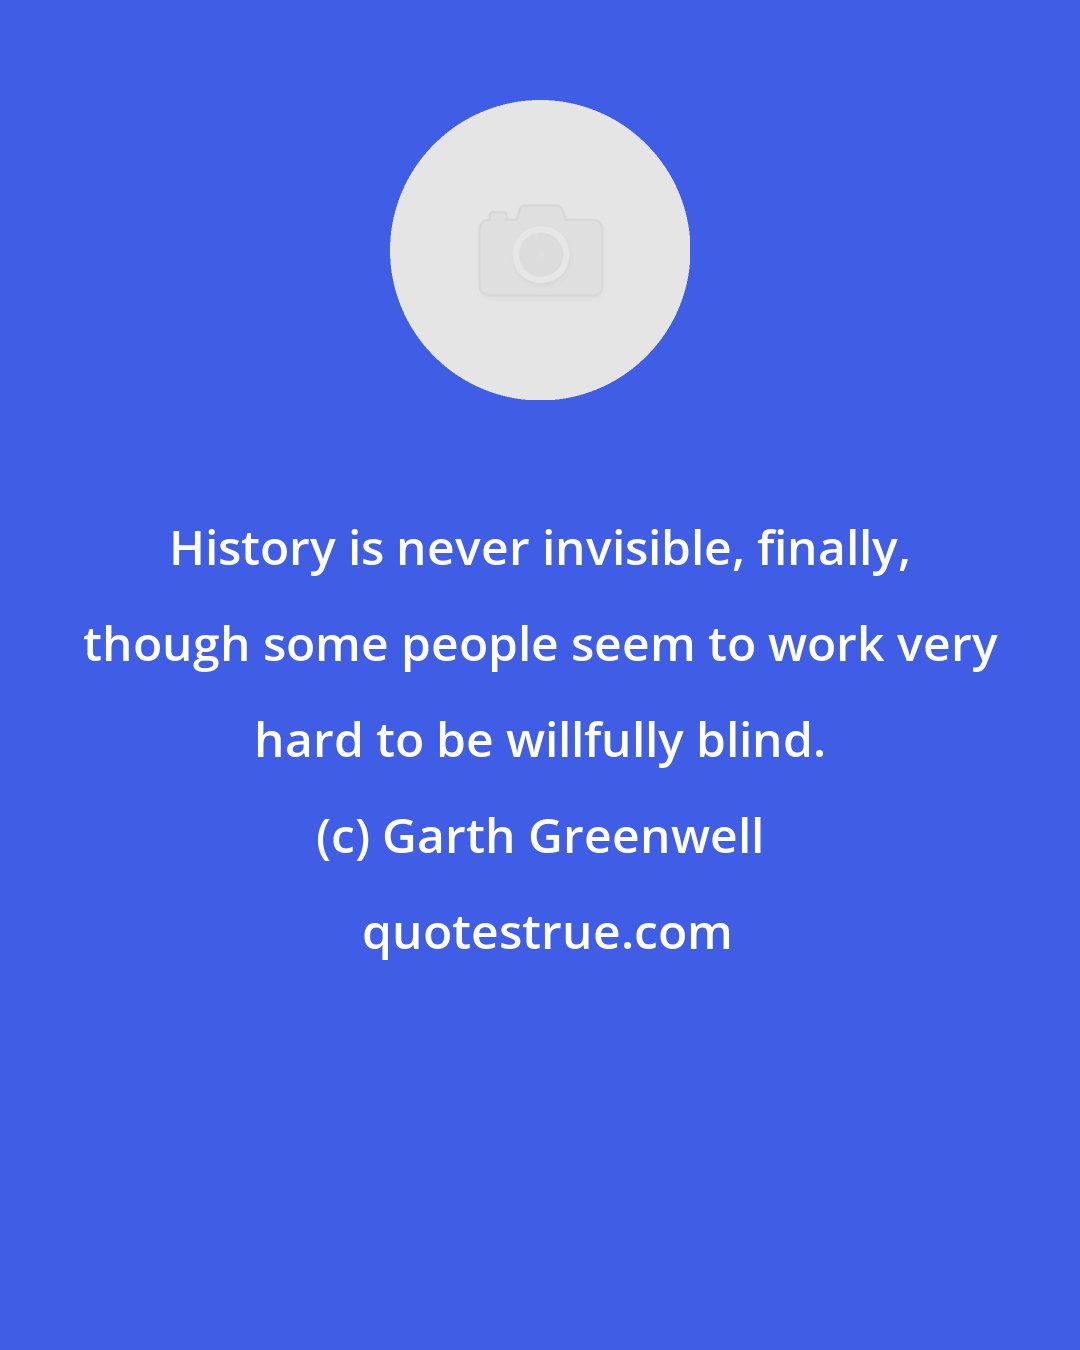 Garth Greenwell: History is never invisible, finally, though some people seem to work very hard to be willfully blind.